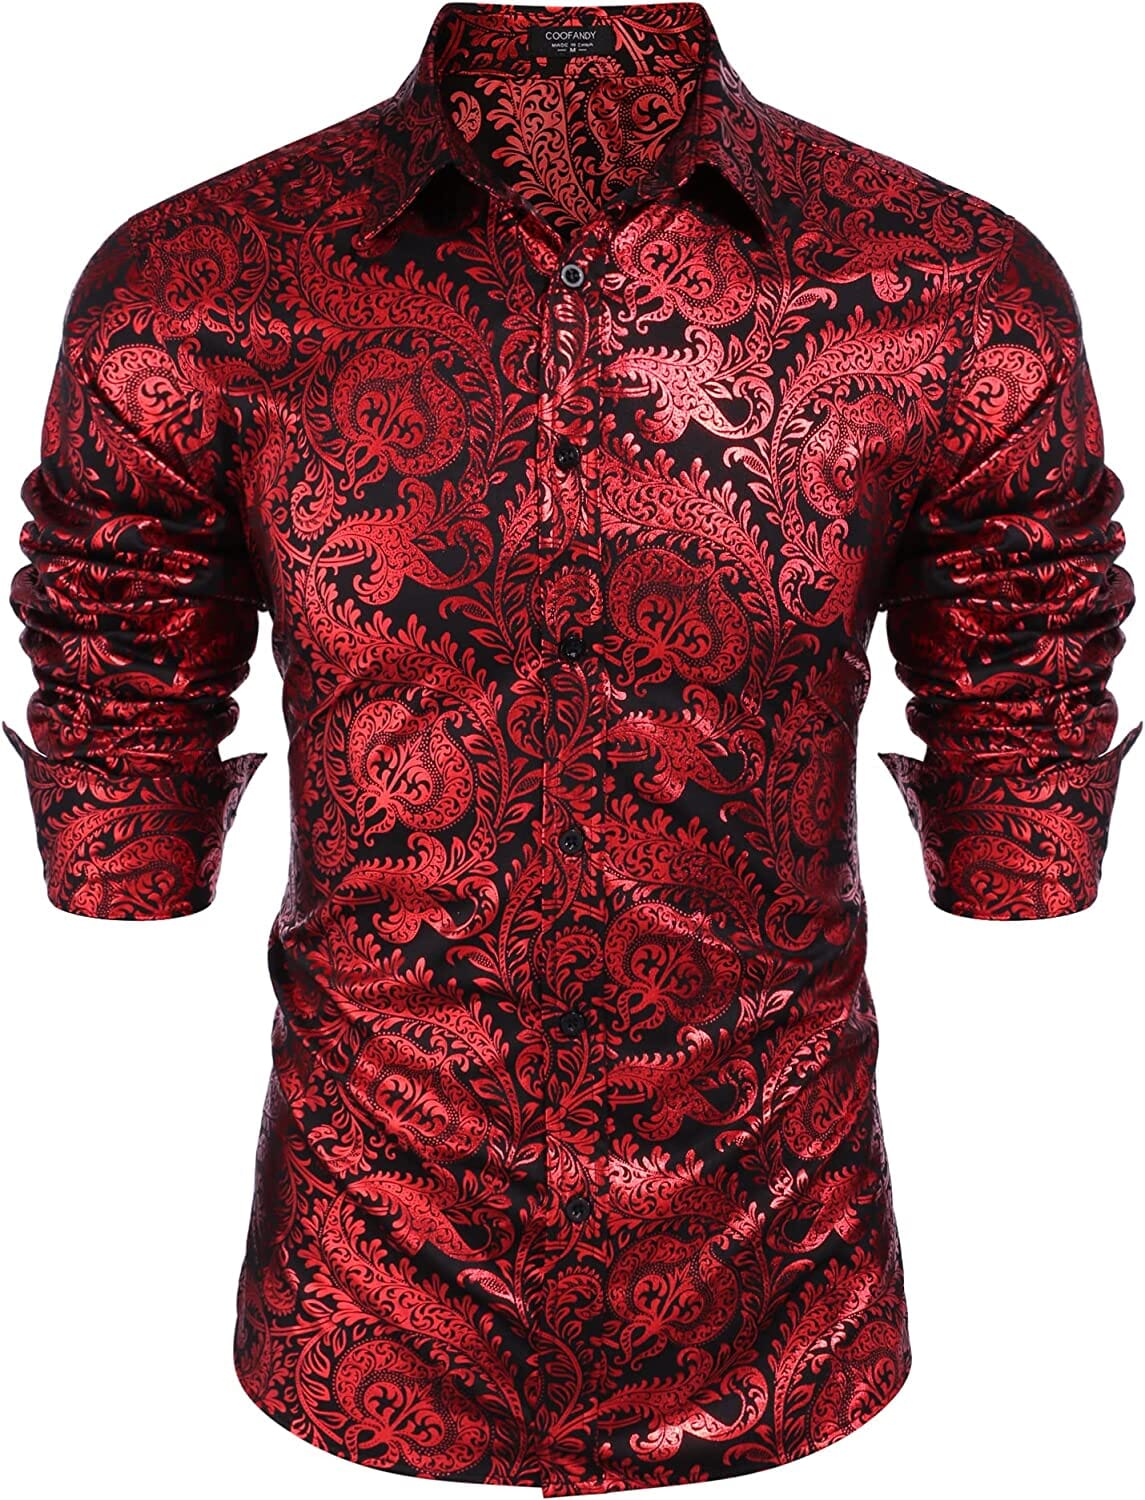 Luxury Design Floral Dress Shirt (US Only) Shirts COOFANDY Store Pat10 S 